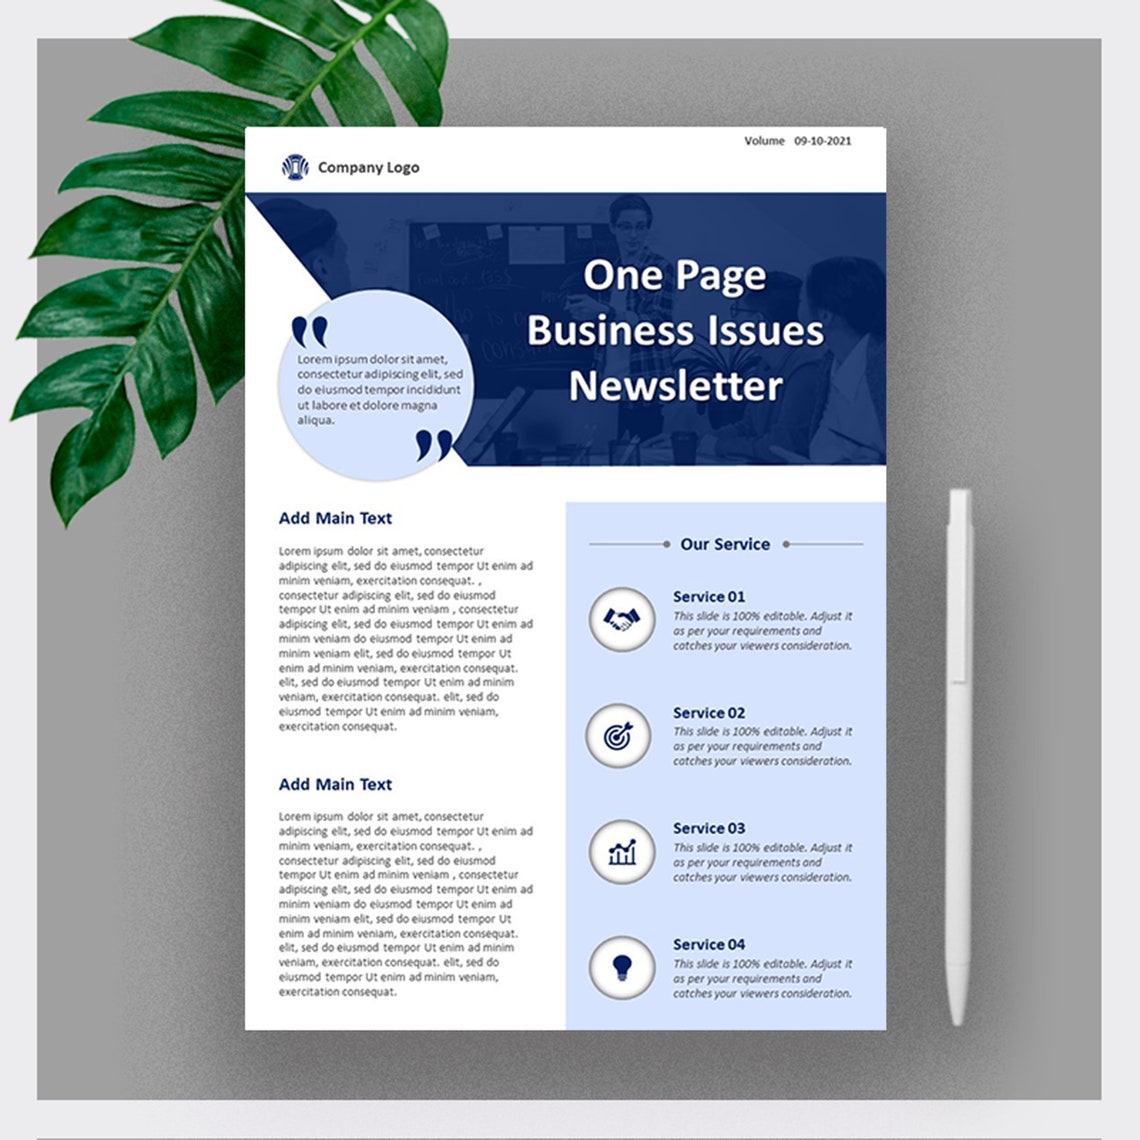 Image of a beautiful newsletter presentation template slide.